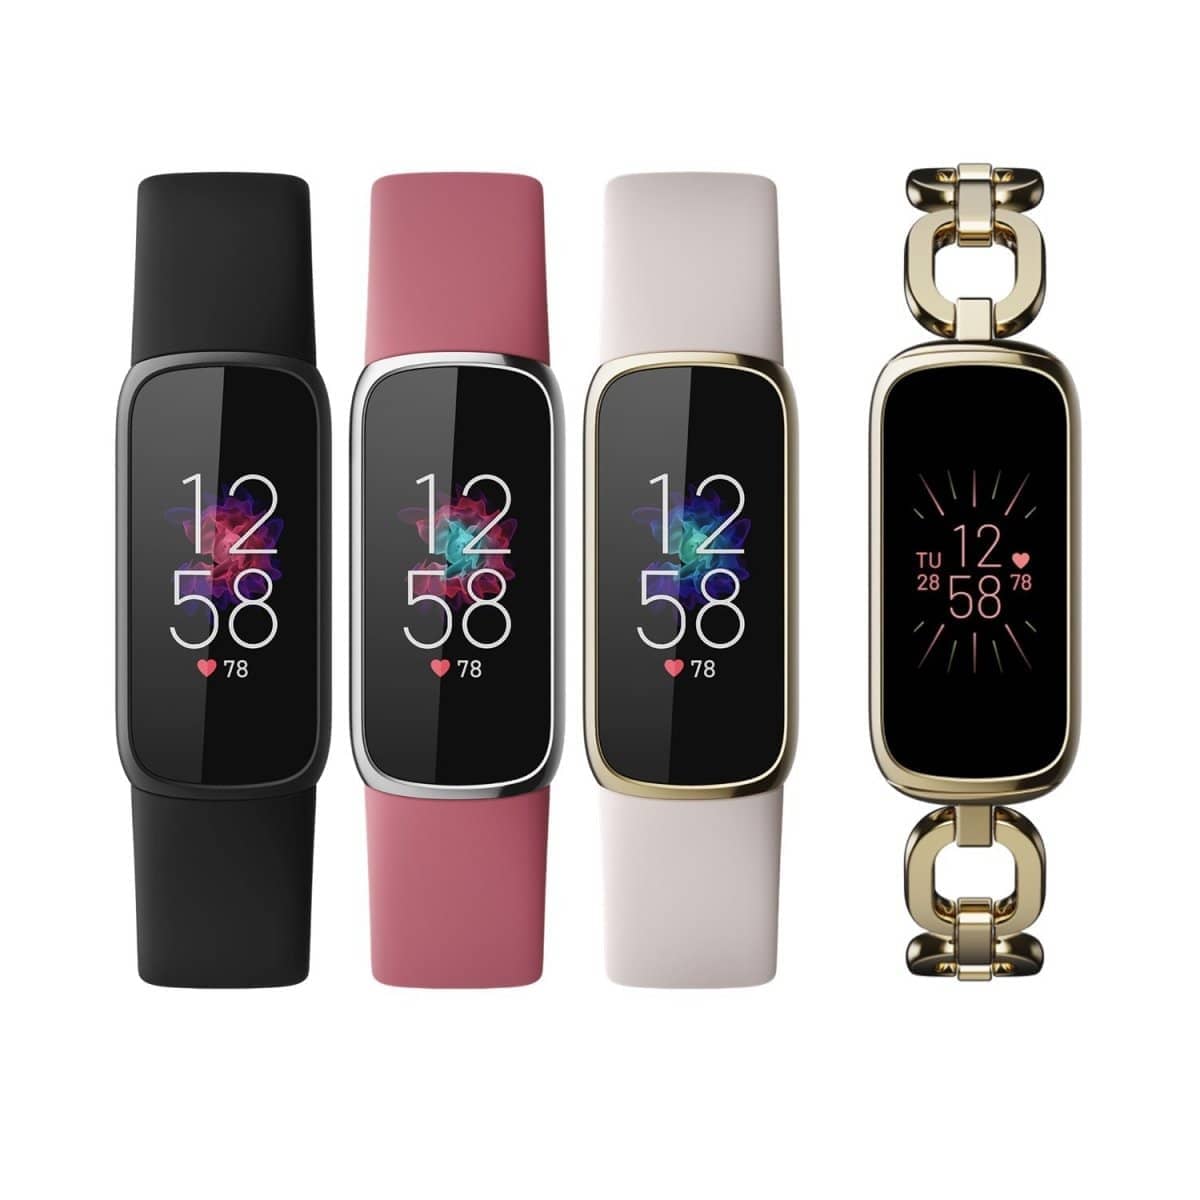 Fitbit Luxe fitness & wellness tracker blends fashion and holistic health »  Gadget Flow